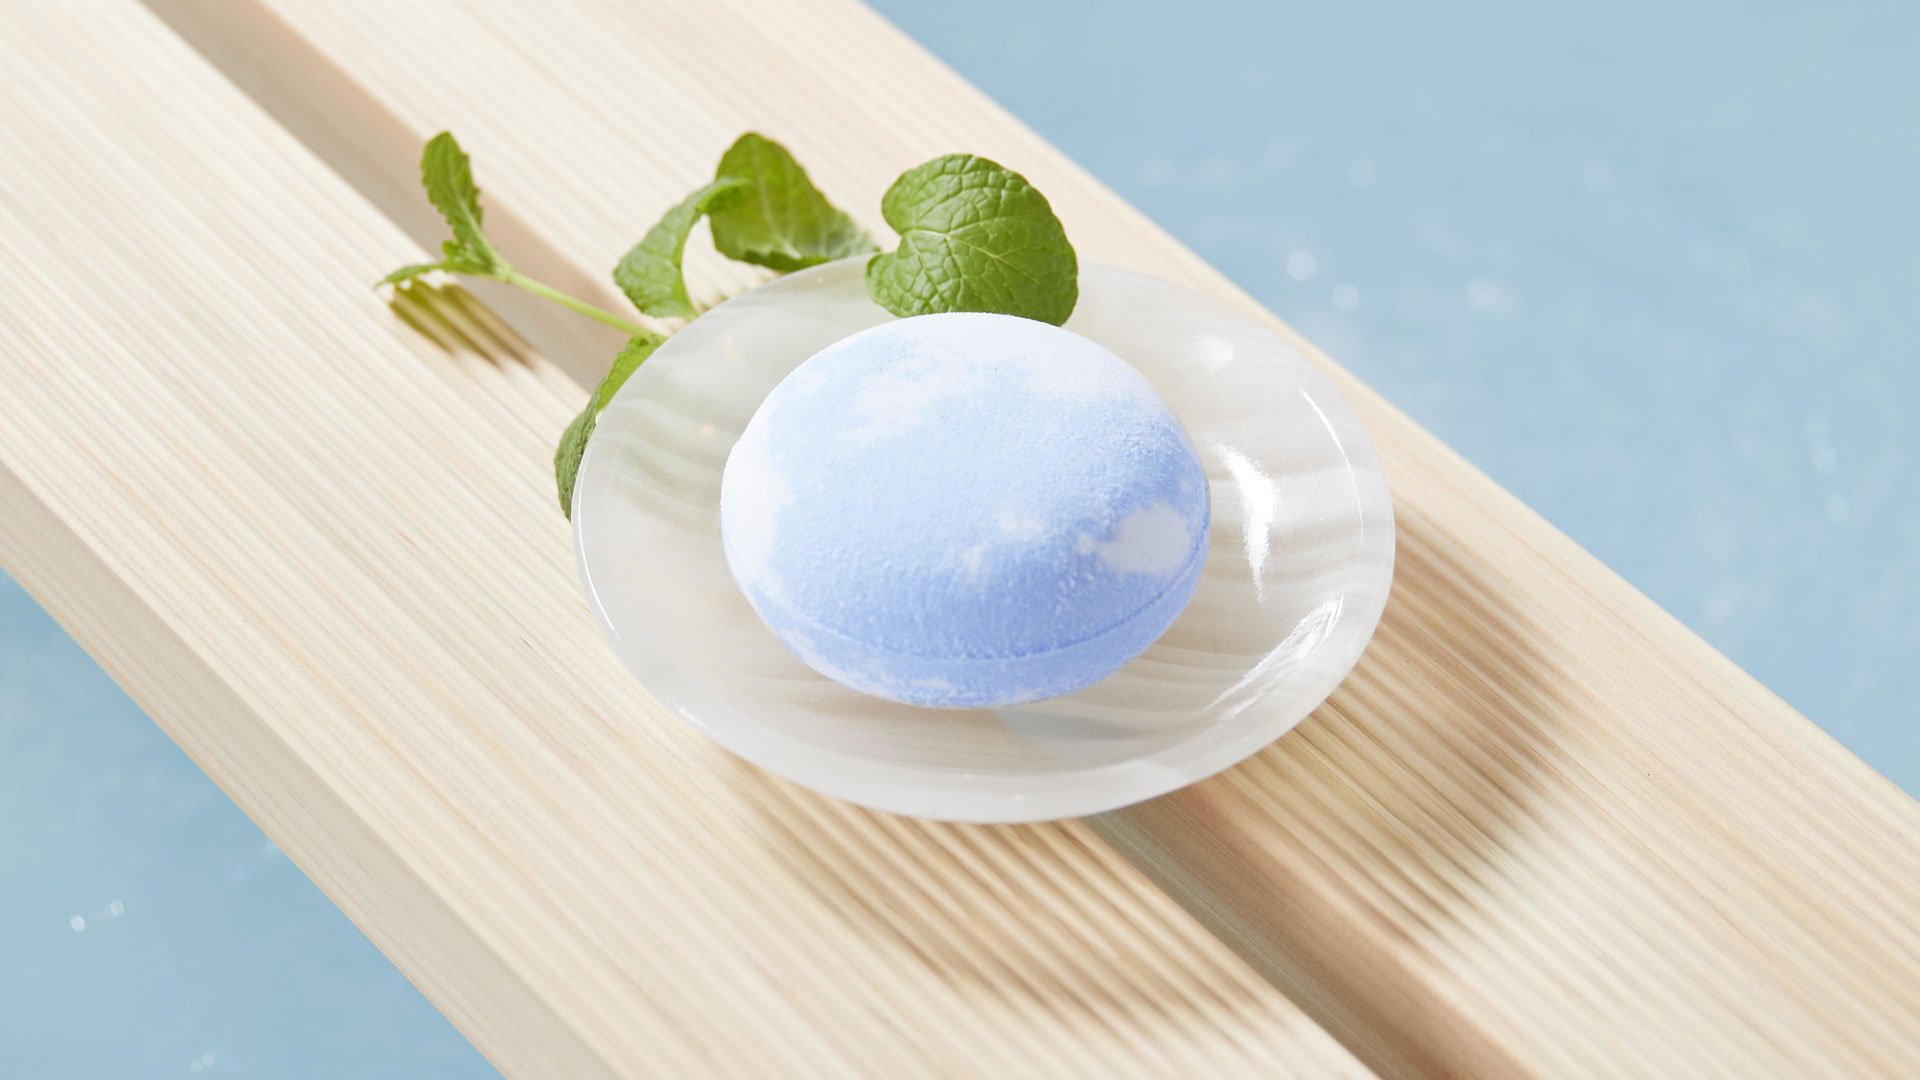 Sprig bath bombs feature thoughtfully paired botanicals and sought-after self-care ingredients like coconut oil, shea butter, and kaolin clay.